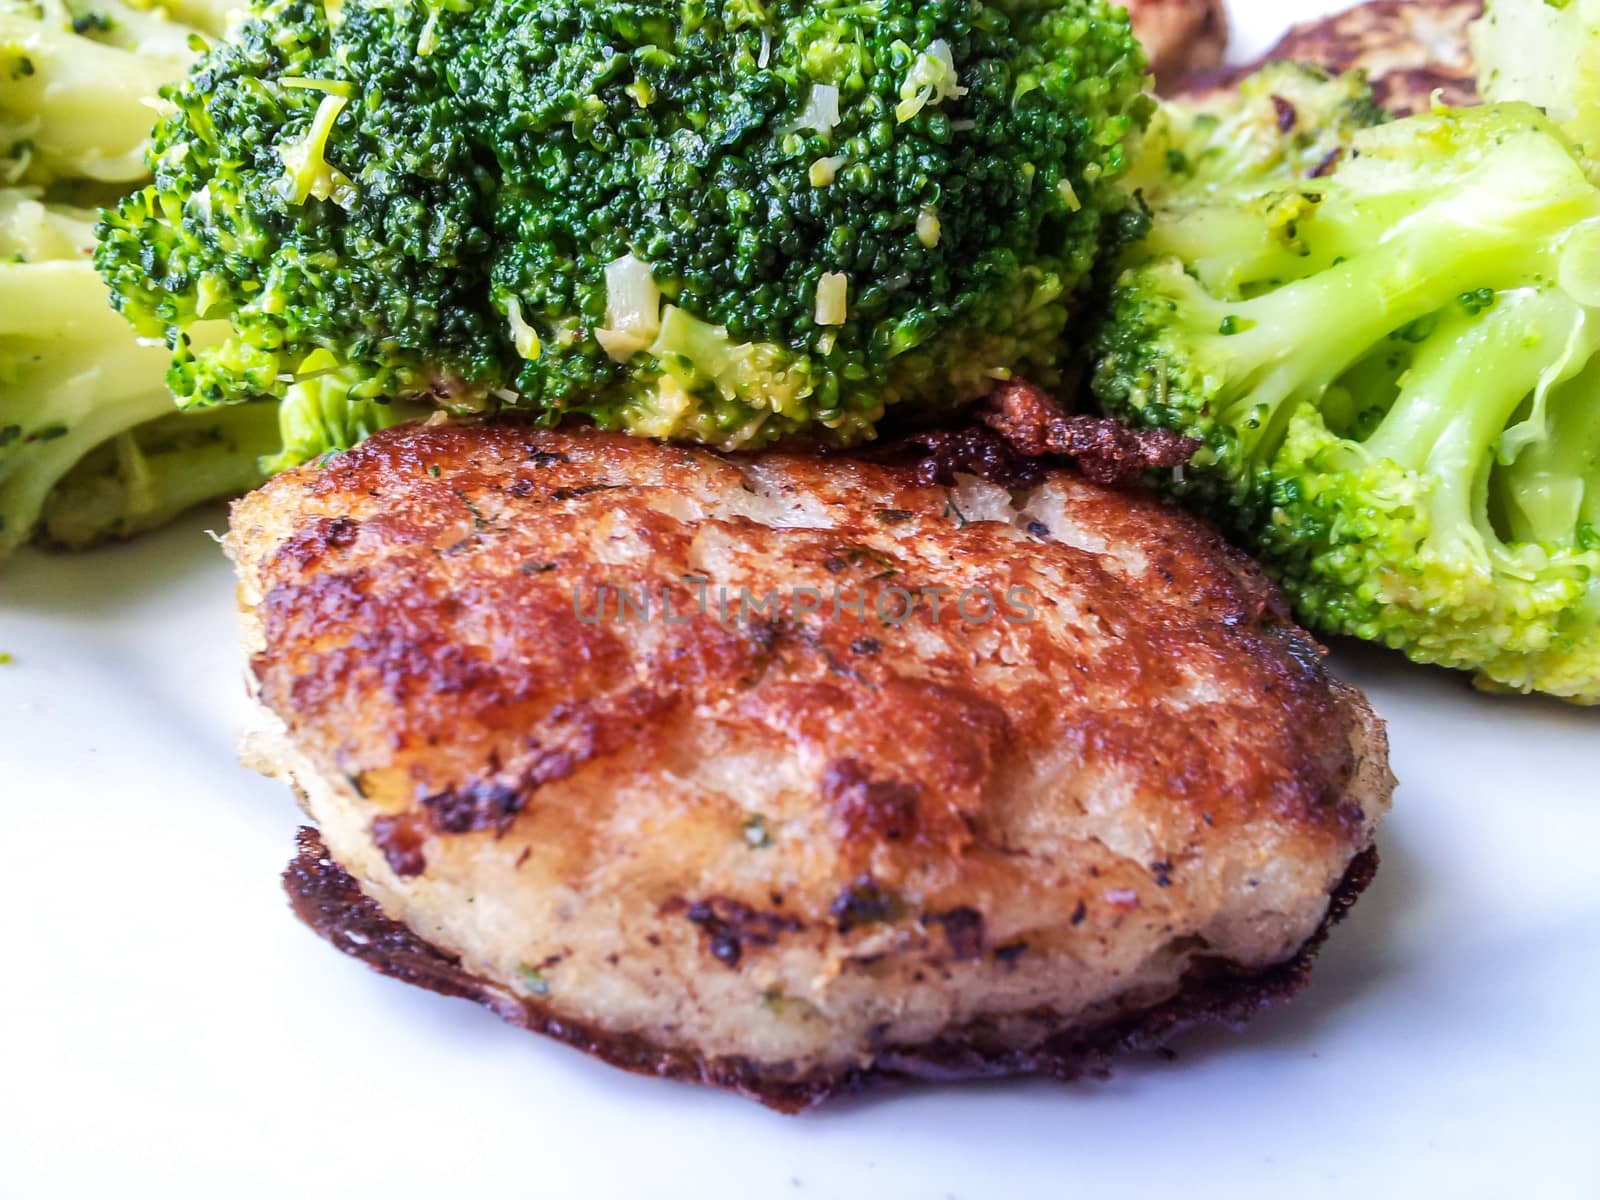 Fresh white fish cake, with beautiful broccoli on the side